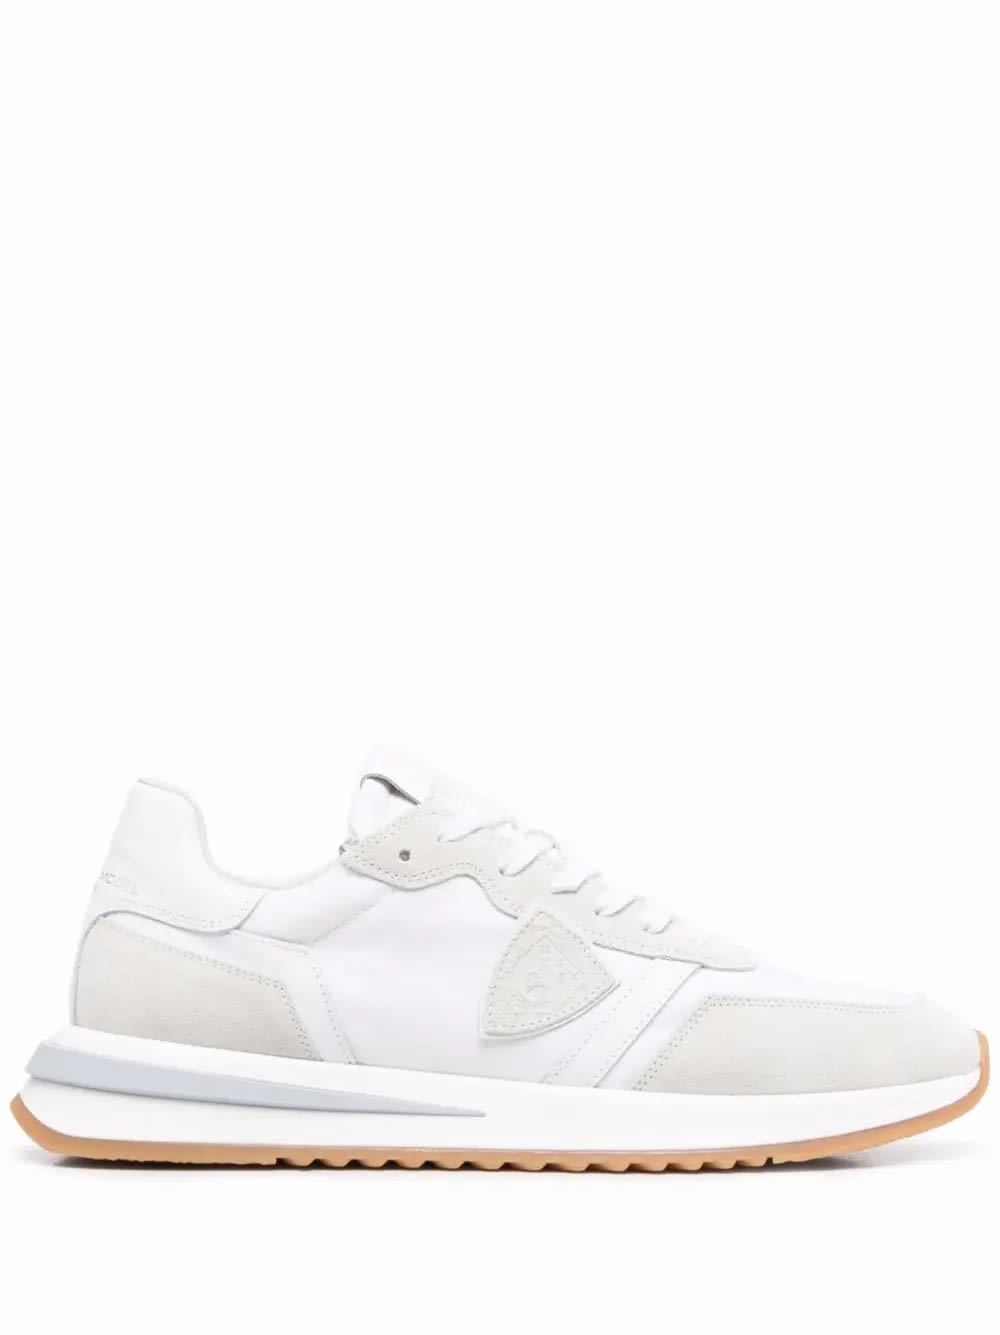 Philippe Model Tropez 2.1 Low Sneakers - White